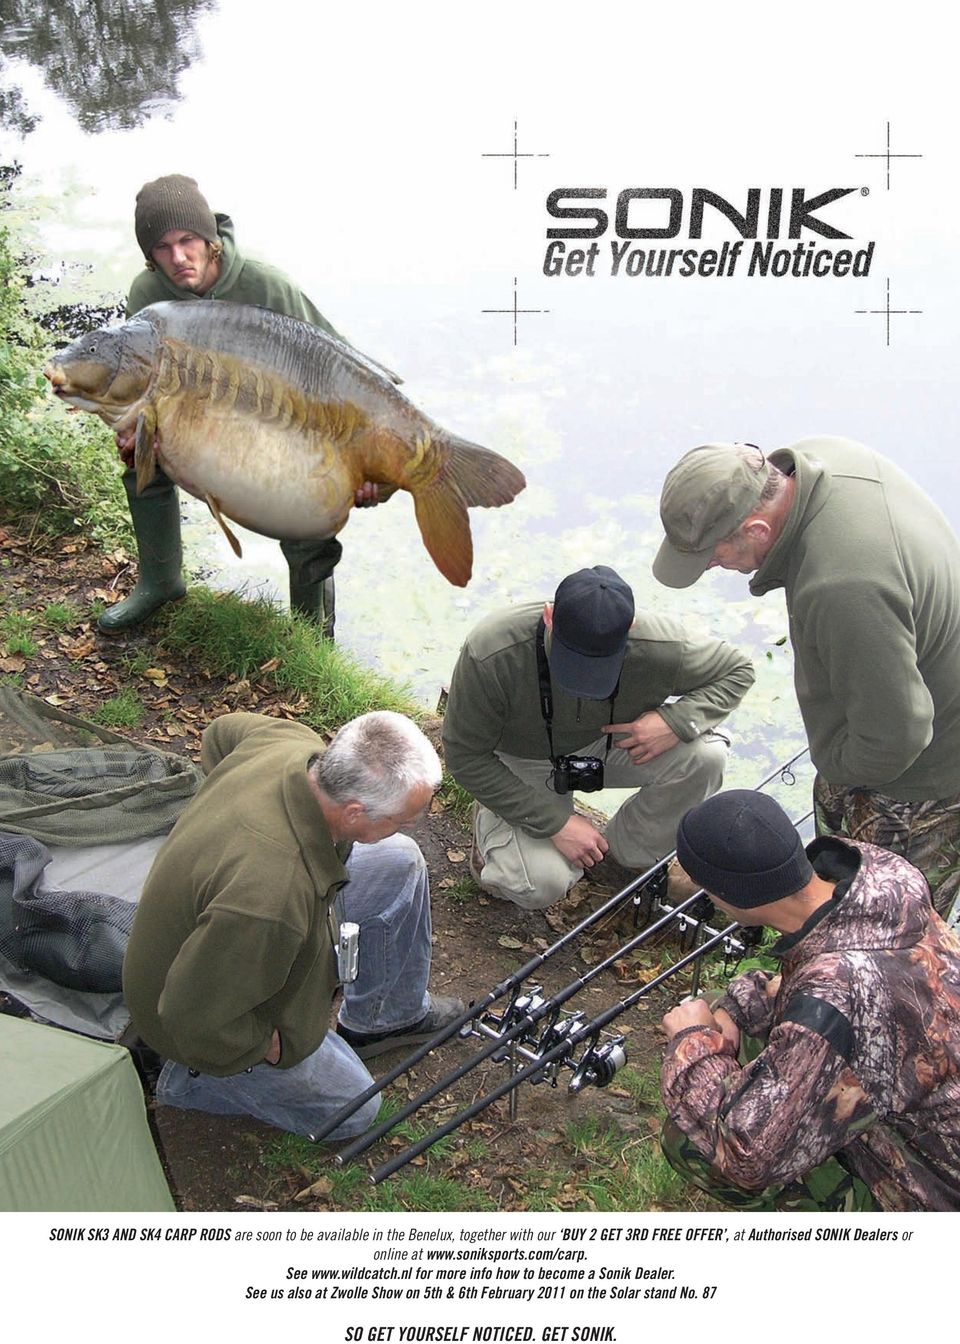 nl together for with more our BUY info 2 how GET to 3RD become FREE OFFER, a Sonik at Dealer. Authorised SONIK Dealers (see web for details), online See at us www.